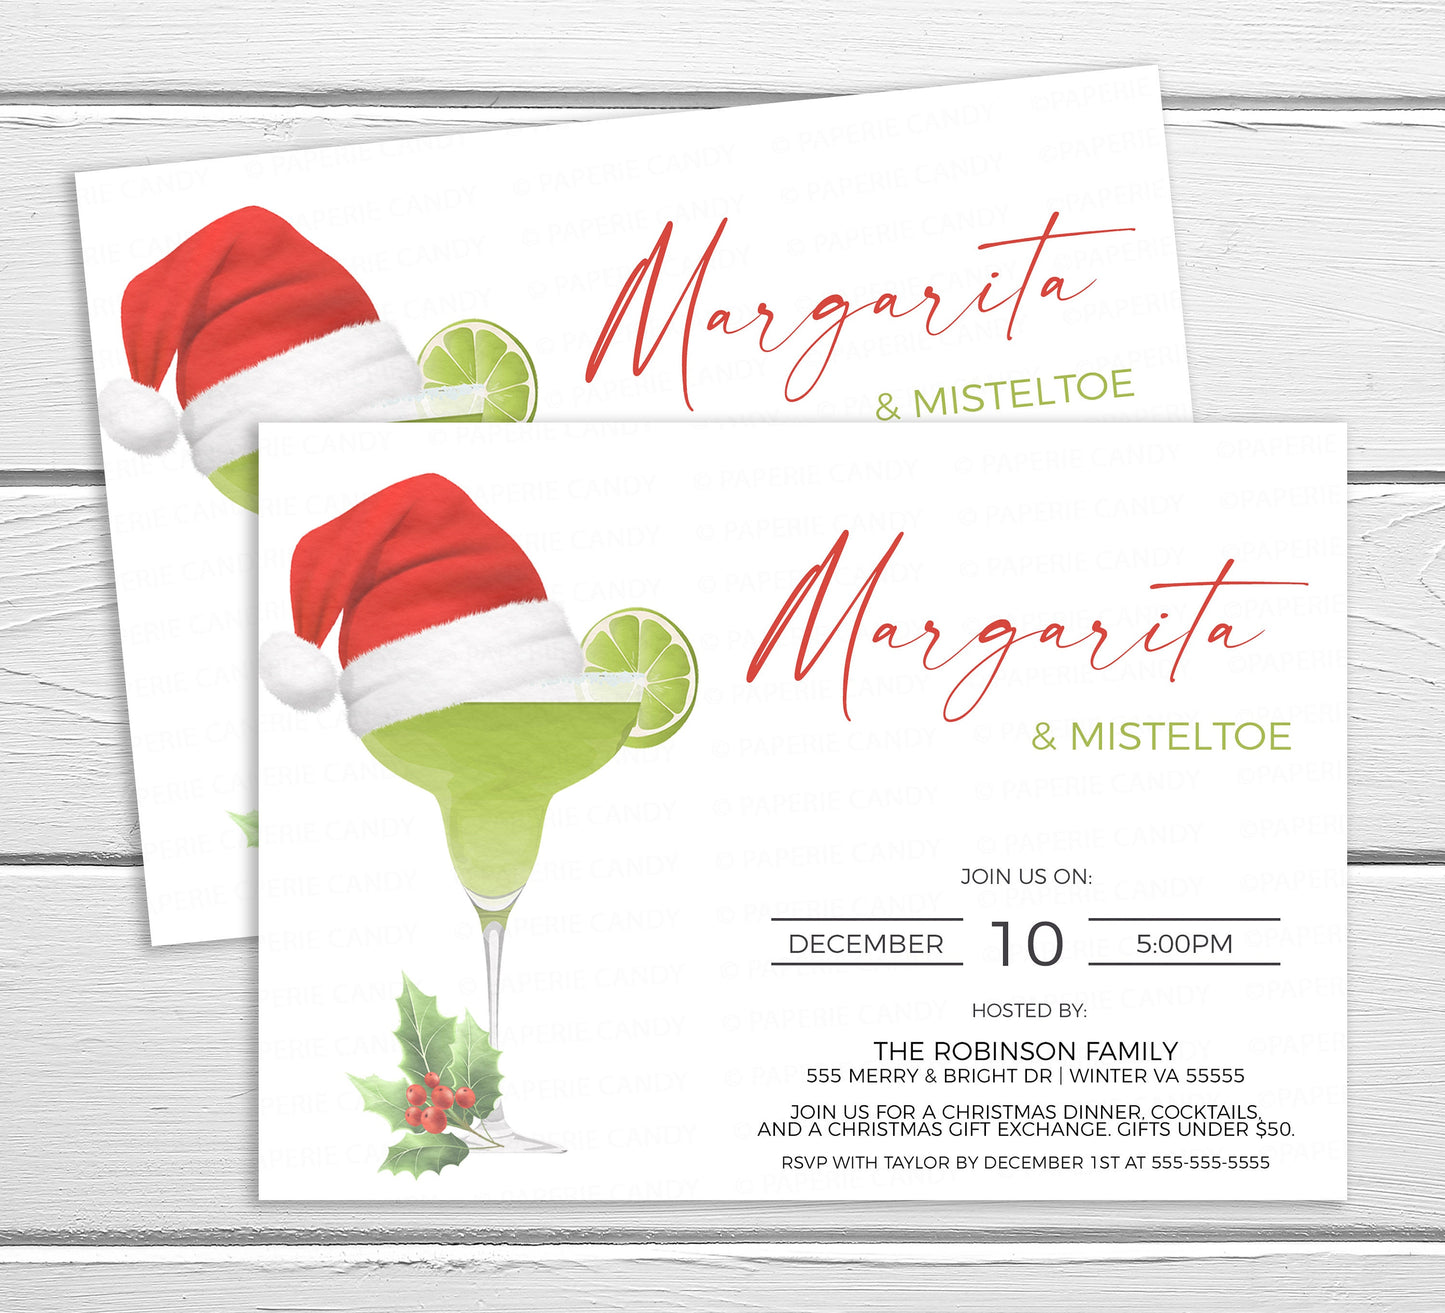 Editable Margarita And Mistletoe Party Invitation, Holiday Fiesta Cocktail Party Invite, Christmas Adult Party, Gift Exchange Swap Printable